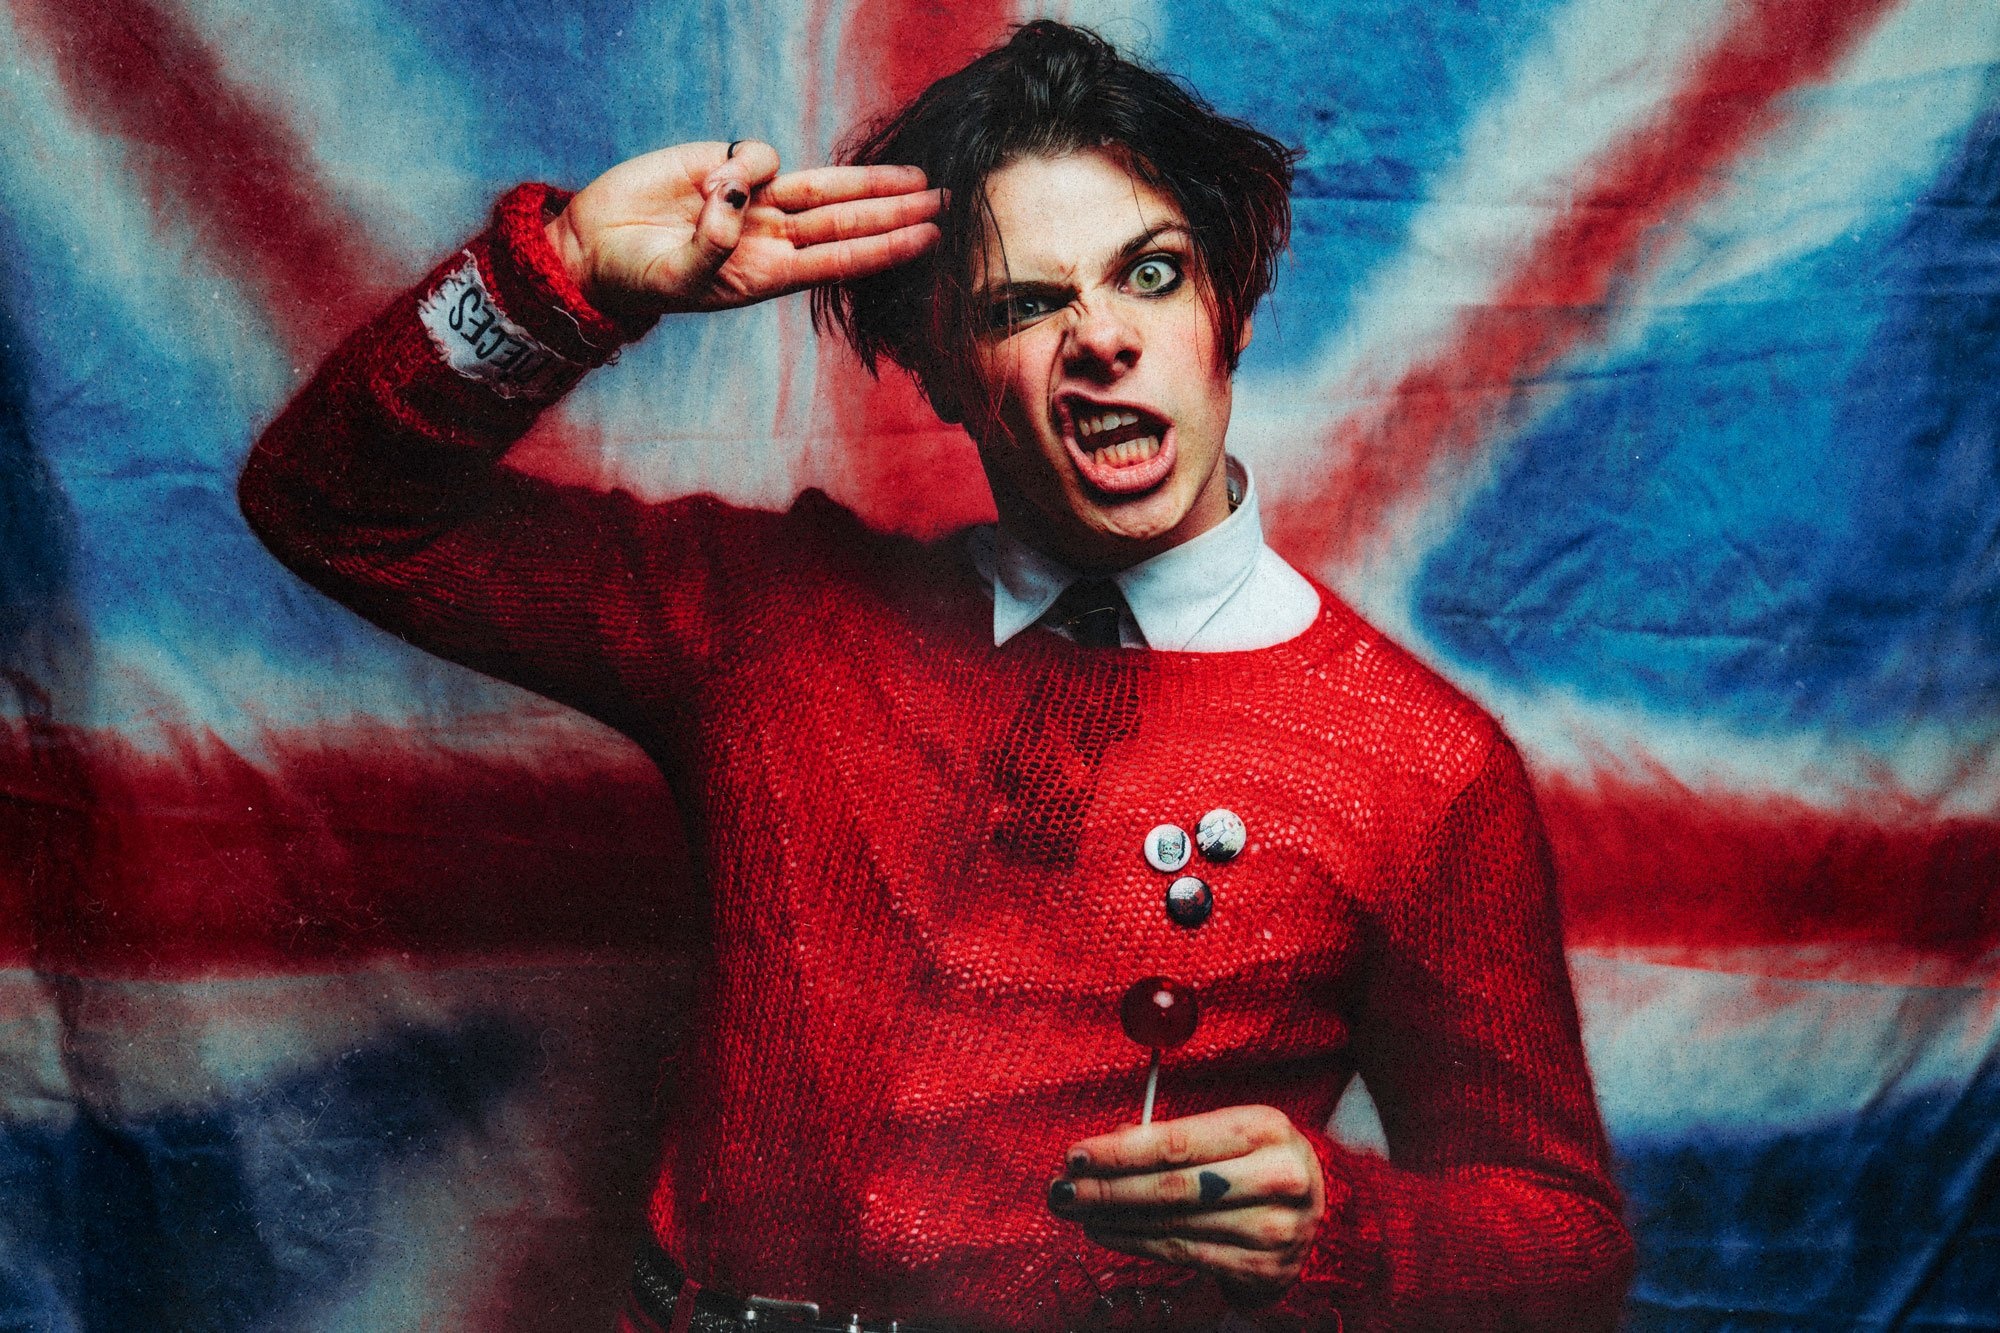 HD wallpaper, Unique Style, Yungblud Music, Desktop Hd Yungblud Wallpaper Photo, The Funeral Song, 2000X1340 Hd Desktop, The Osbournes Cameo